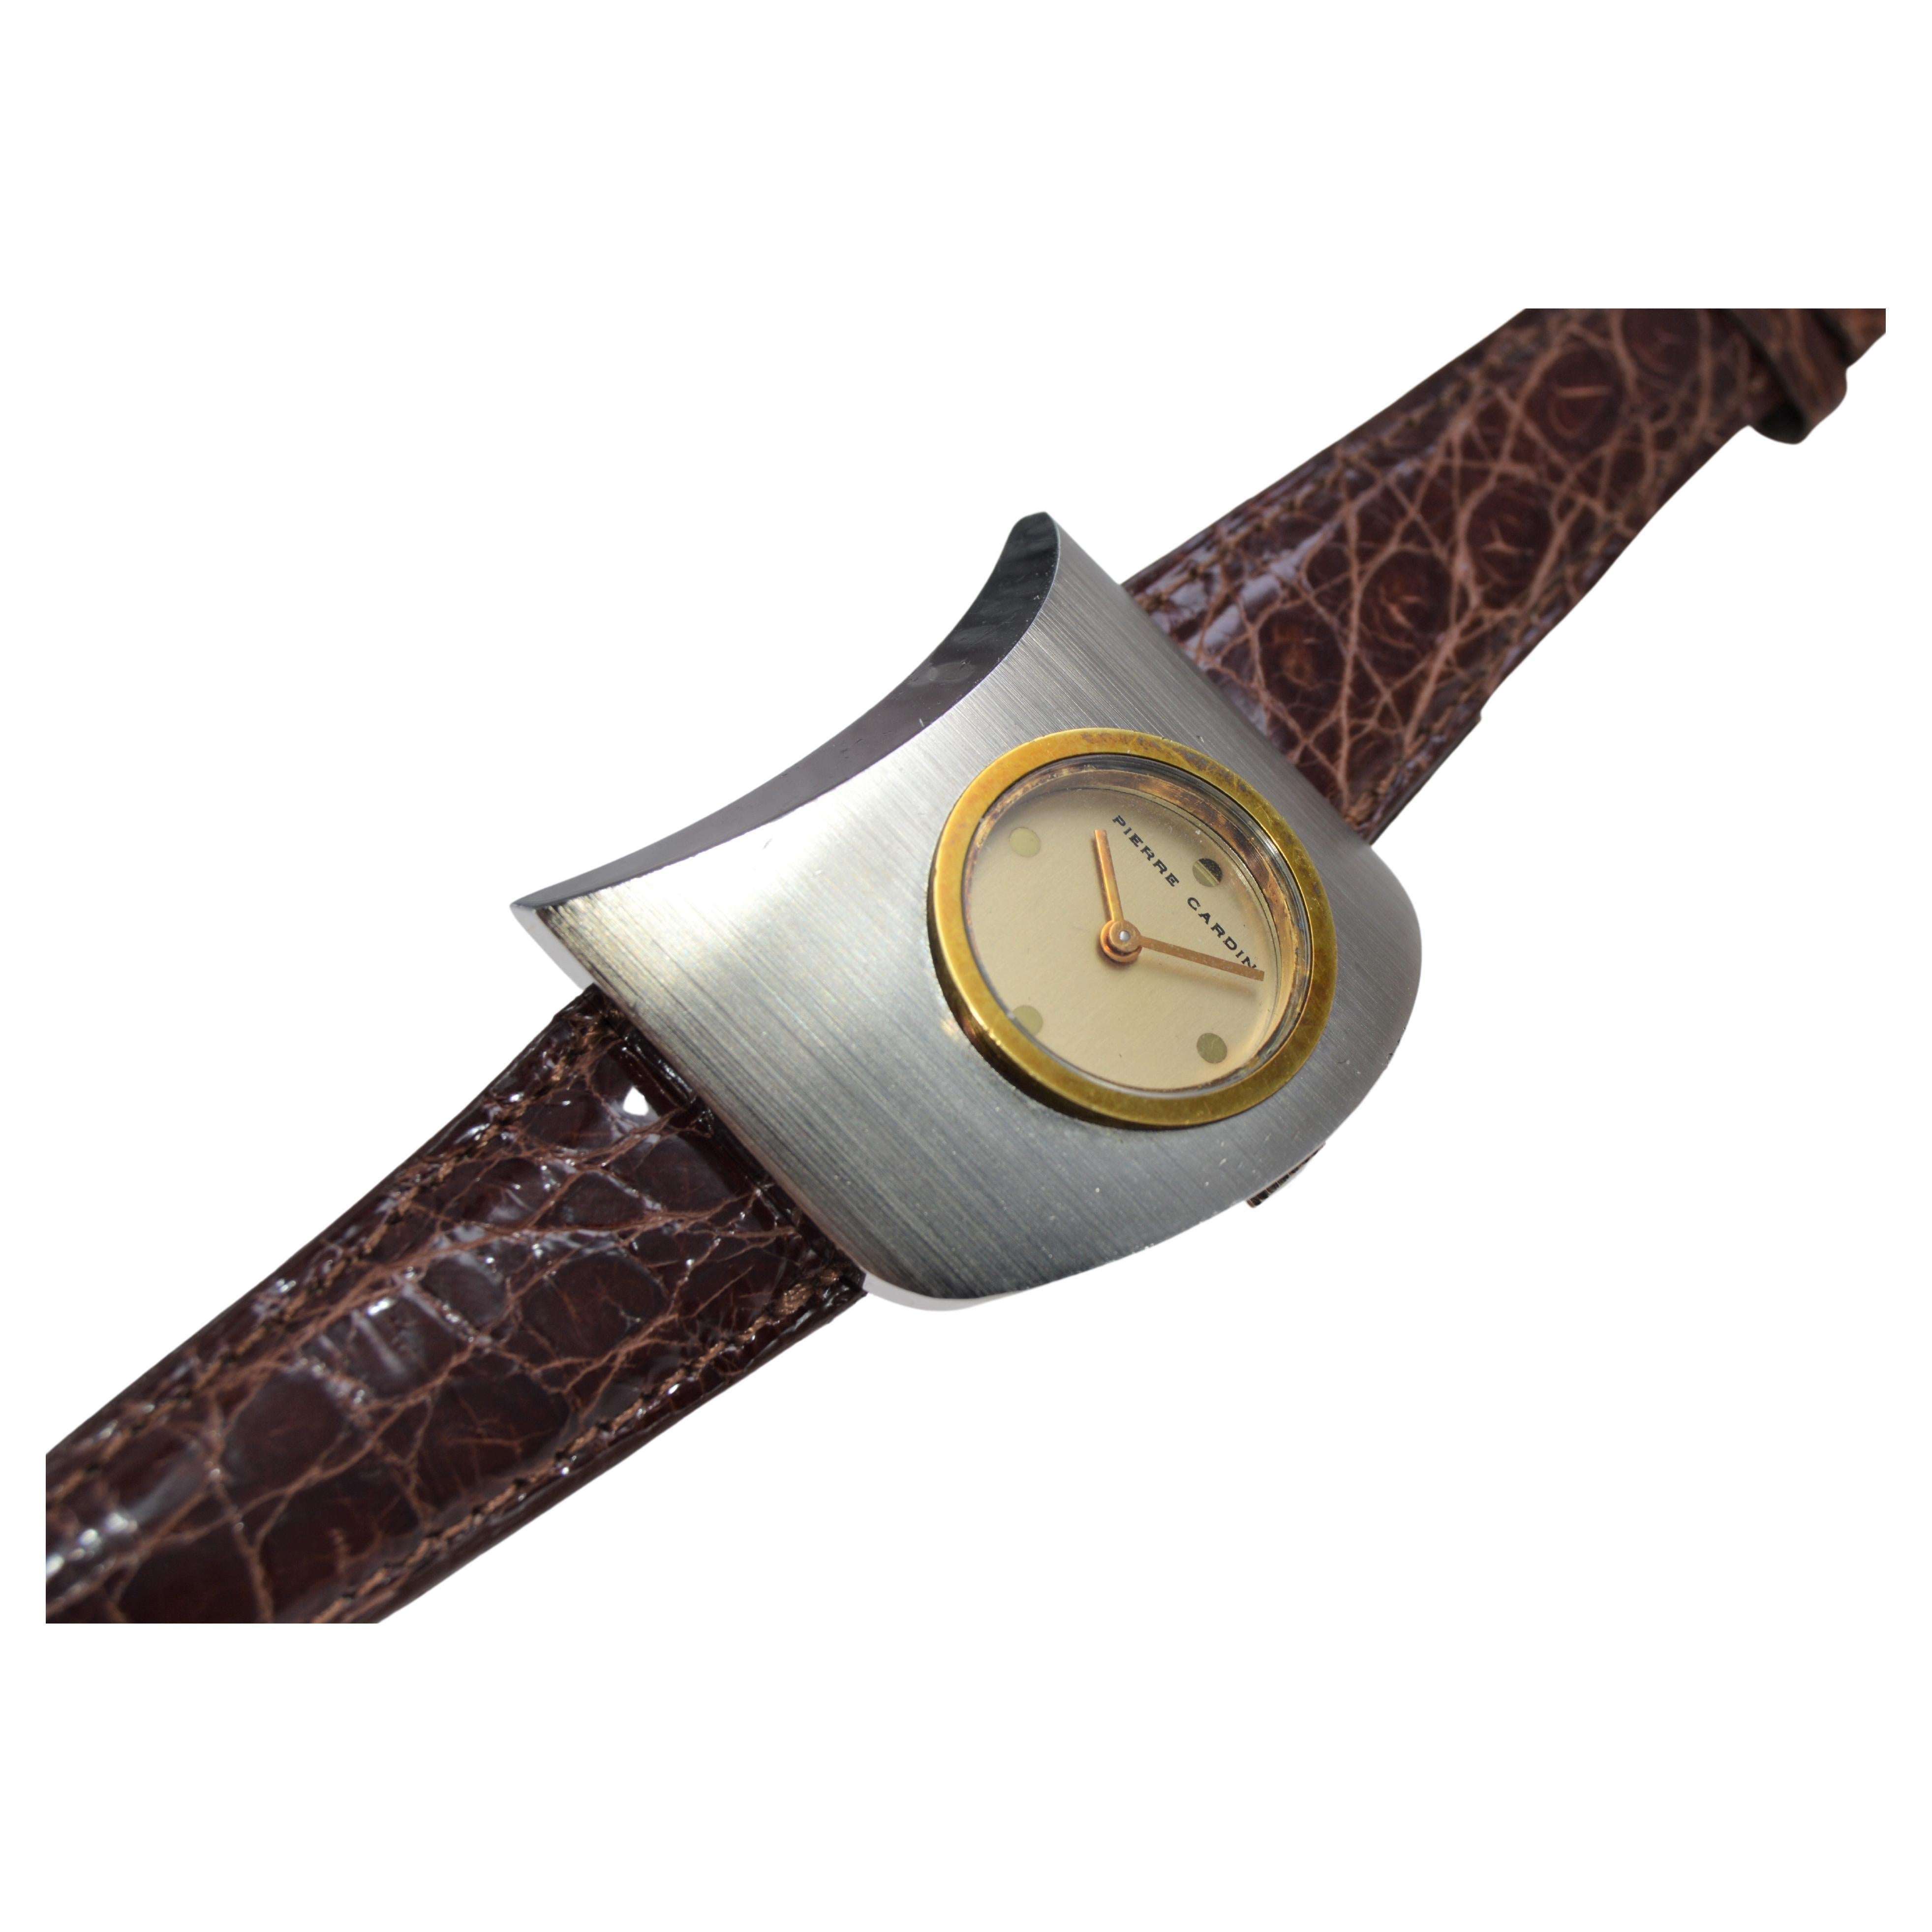 FACTORY / HOUSE: Pierre Cardin / Movement by Jaeger Le Coultre
STYLE / REFERENCE: Moderne 
METAL / MATERIAL: Stainless Steel / Solid Yellow Gold Bezel
DIMENSIONS: Length 40mm  X Width 32mm
CIRCA: 1970's
MOVEMENT / CALIBER: Manual Winding / 17